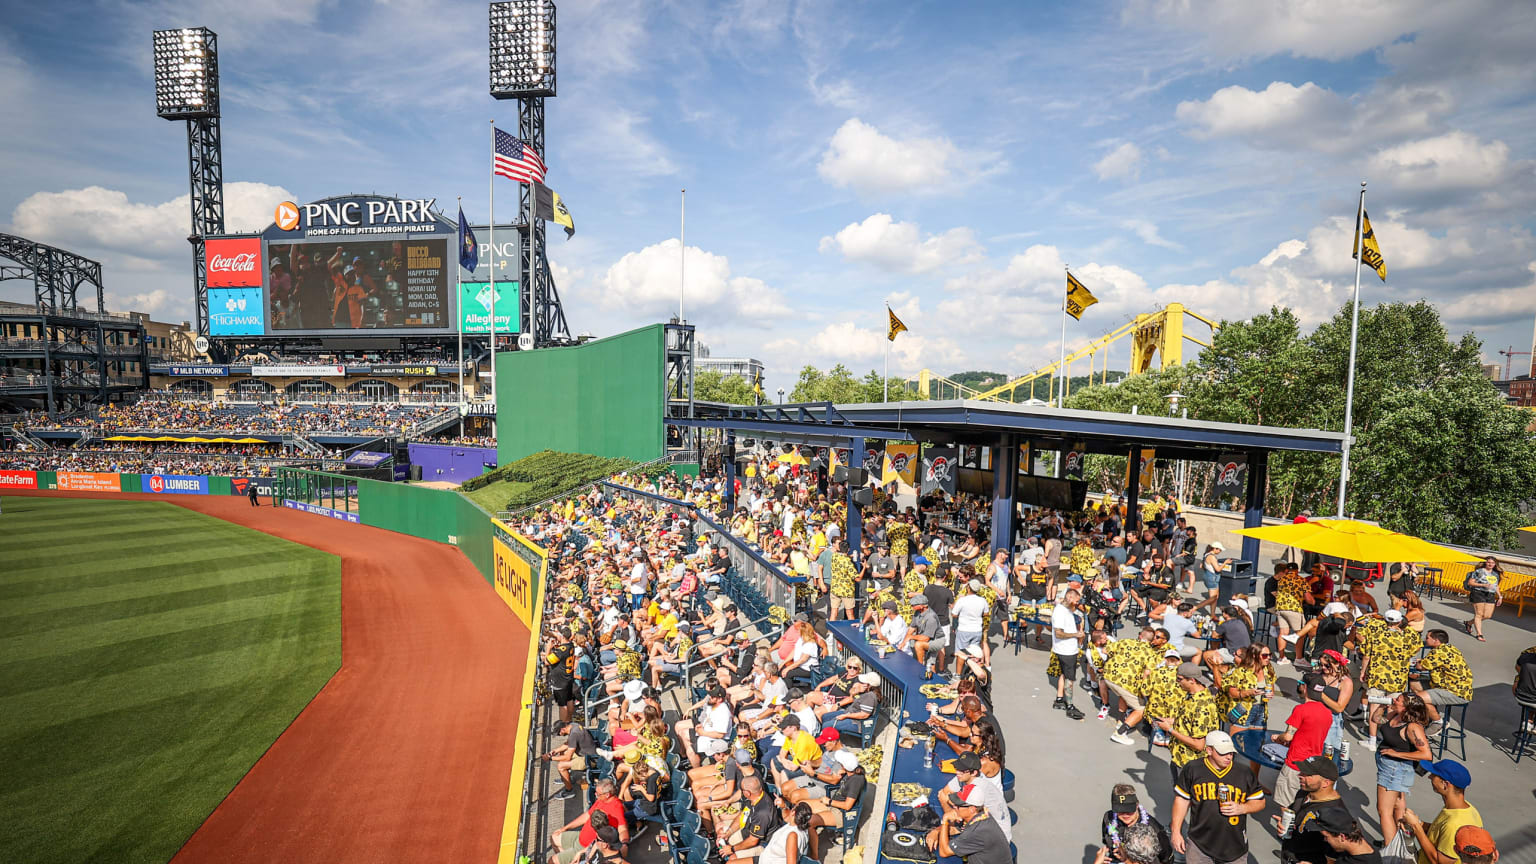 Pittsburgh is Home to a Beautiful Ballpark in PNC Park - SeatGeek - TBA